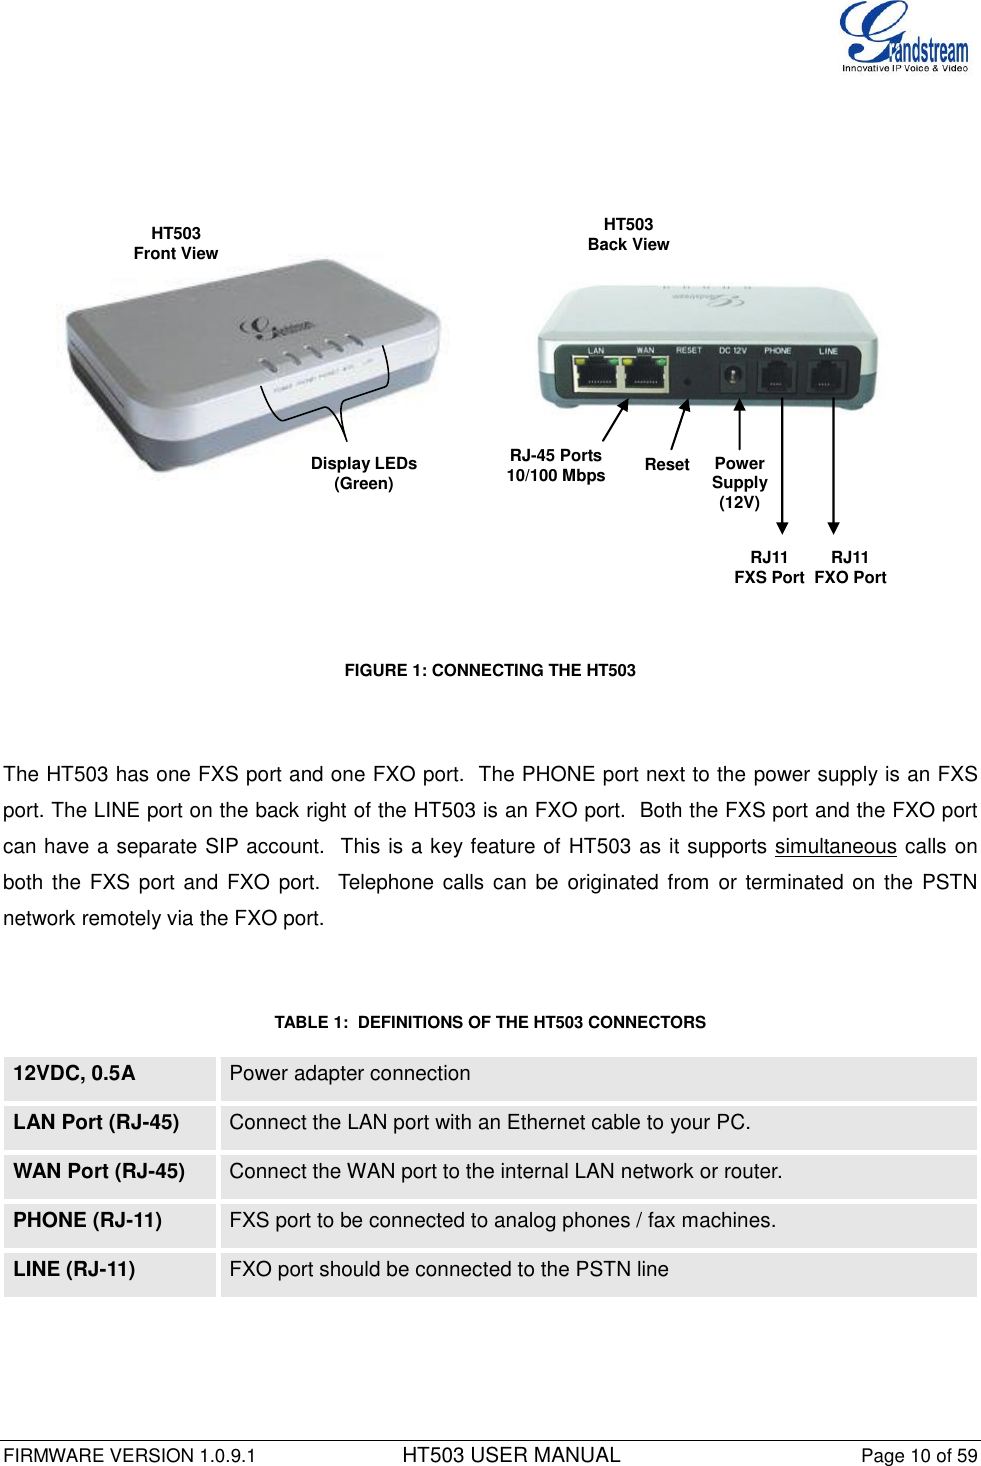  FIRMWARE VERSION 1.0.9.1          HT503 USER MANUAL Page 10 of 59       HT503  Front View HT503 Back View Display LEDs (Green) RJ-45 Ports 10/100 Mbps Reset  Power Supply (12V) RJ11 FXS Port  RJ11  FXO Port              FIGURE 1: CONNECTING THE HT503          The HT503 has one FXS port and one FXO port.  The PHONE port next to the power supply is an FXS port. The LINE port on the back right of the HT503 is an FXO port.  Both the FXS port and the FXO port can have a separate SIP account.  This is a key feature of HT503 as it supports simultaneous calls on both the FXS  port and FXO port.  Telephone calls can be  originated from or  terminated on the  PSTN network remotely via the FXO port.    TABLE 1:  DEFINITIONS OF THE HT503 CONNECTORS  12VDC, 0.5A Power adapter connection   LAN Port (RJ-45) Connect the LAN port with an Ethernet cable to your PC. WAN Port (RJ-45) Connect the WAN port to the internal LAN network or router. PHONE (RJ-11) FXS port to be connected to analog phones / fax machines. LINE (RJ-11) FXO port should be connected to the PSTN line   